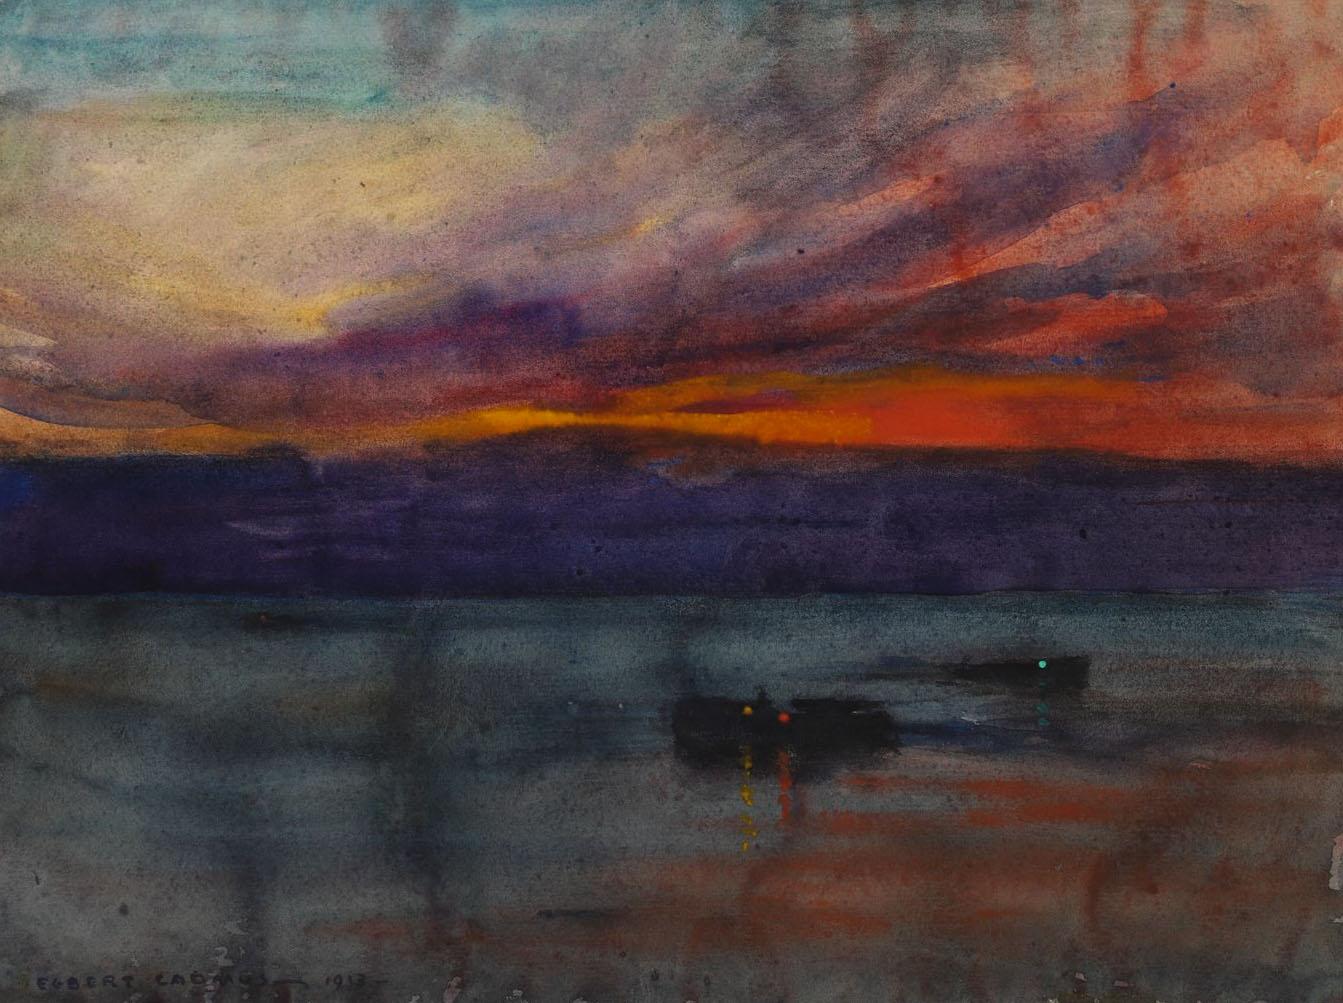 Antique 1913 Egbert Cadmus Evening Hudson River Watercolor Painting In Good Condition For Sale In Seguin, TX